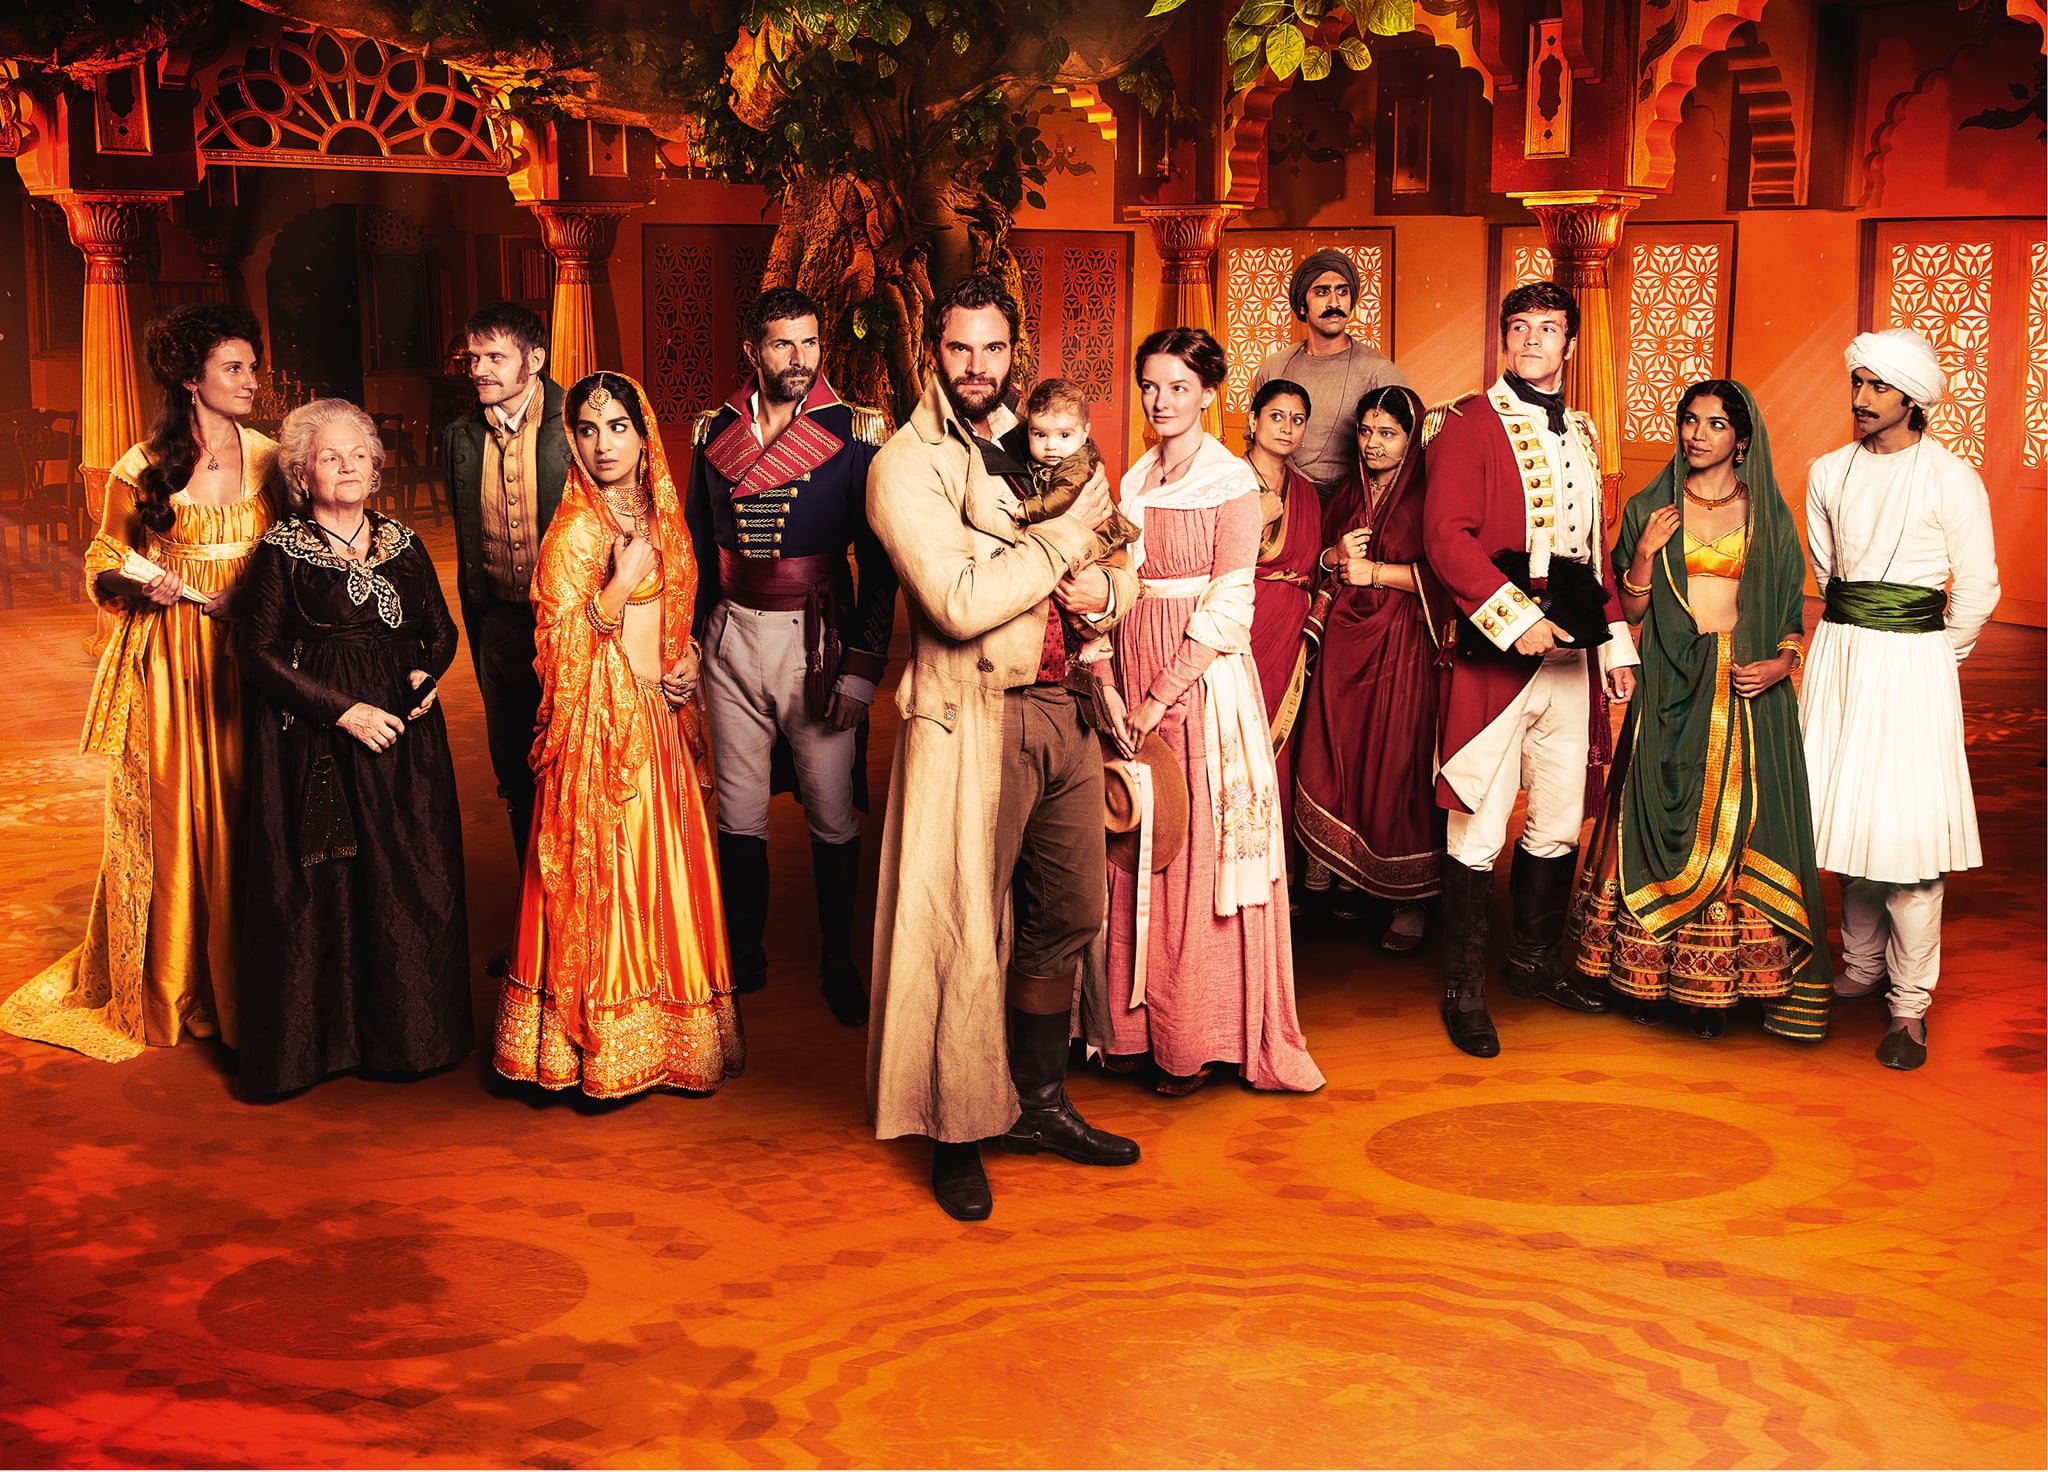 BEND IT TV FORITVBEECHAM HOUSEBEECHAM HOUSE FIRST LOOK PICTURESTom Bateman, Marc Warren, Lesley Nicol, Leo Suter, Dakota Blue Richards, Pallavi Sharda Bessie Carter and Viveik Kalra appear in epic and ambitious drama Beecham House airing on ITV this Spring. Produced by award winning production company Bend It TV, and directed and written by Gurinder Chadha OBE, the six part series is set in Delhi on the cusp of the 19th century. The drama depicts the fortunes of the residents of Beecham House, an imposing and beautiful mansion owned by enigmatic, soulful John Beecham, played by Tom Bateman, a former soldier determined to begin a new life with his family. However, John is haunted by his past and with dangerous enemies in high places, rival suitors competing for his heart and discord with family members, his plan for a new life does not run smoothly. The series also features Gregory Fitoussi, Adil Ray, Laura Dutta and Shriya Pilgaonkar.Beecham House is written by Gurinder Chadha, Paul Mayeda Berges (Viceroys House, The Mistress of Spices, Angus, Thongs and Perfect Snogging) Victor Levin (Destination Wedding, Mad Men, Mad About You) and Shahrukh Husain. Caroline Levy (Hooten & the Lady, Inspector George Gently, The Mill) is the Series Producer.  Acclaimed writer and international renowned expert on this period in India, William Dalrymple, and Shahrukh Husain are historical consultants for the series. FremantleMedia International will act as the global distributor for the series.Pictured L-R:BESSIE CARTER as Violet,LESLEY NICOL as Henrietta,MARC WARREN as Samuel, PALLAVI SHARDA as Chandrika,GREGORY FITOUSSI as General Castillon,TOM BATEMAN as John Beecham,DAKOTA BLUE RICHARDS as Margaret,GOLDY NOTAY as Bindu,AMER CHADHA-PATEL as Ram Lal,TRUPTI KHAMKAR as Maya,LEO SUTER as Daniel,SHRIYA PILGAONKAR as Chanchal and VIVEIK KALRA as Baadal.This photograph must not be syndicated to any other company, publication or website, or permanently archived, without the express written permission of ITV Picture Desk. Full Terms and conditions are available on  www.itv.com/presscentre/itvpictures/termsCopyright: ITV,FREMANTLEFor further information please contact:Patrick.smith@itv.com 0207 1573044